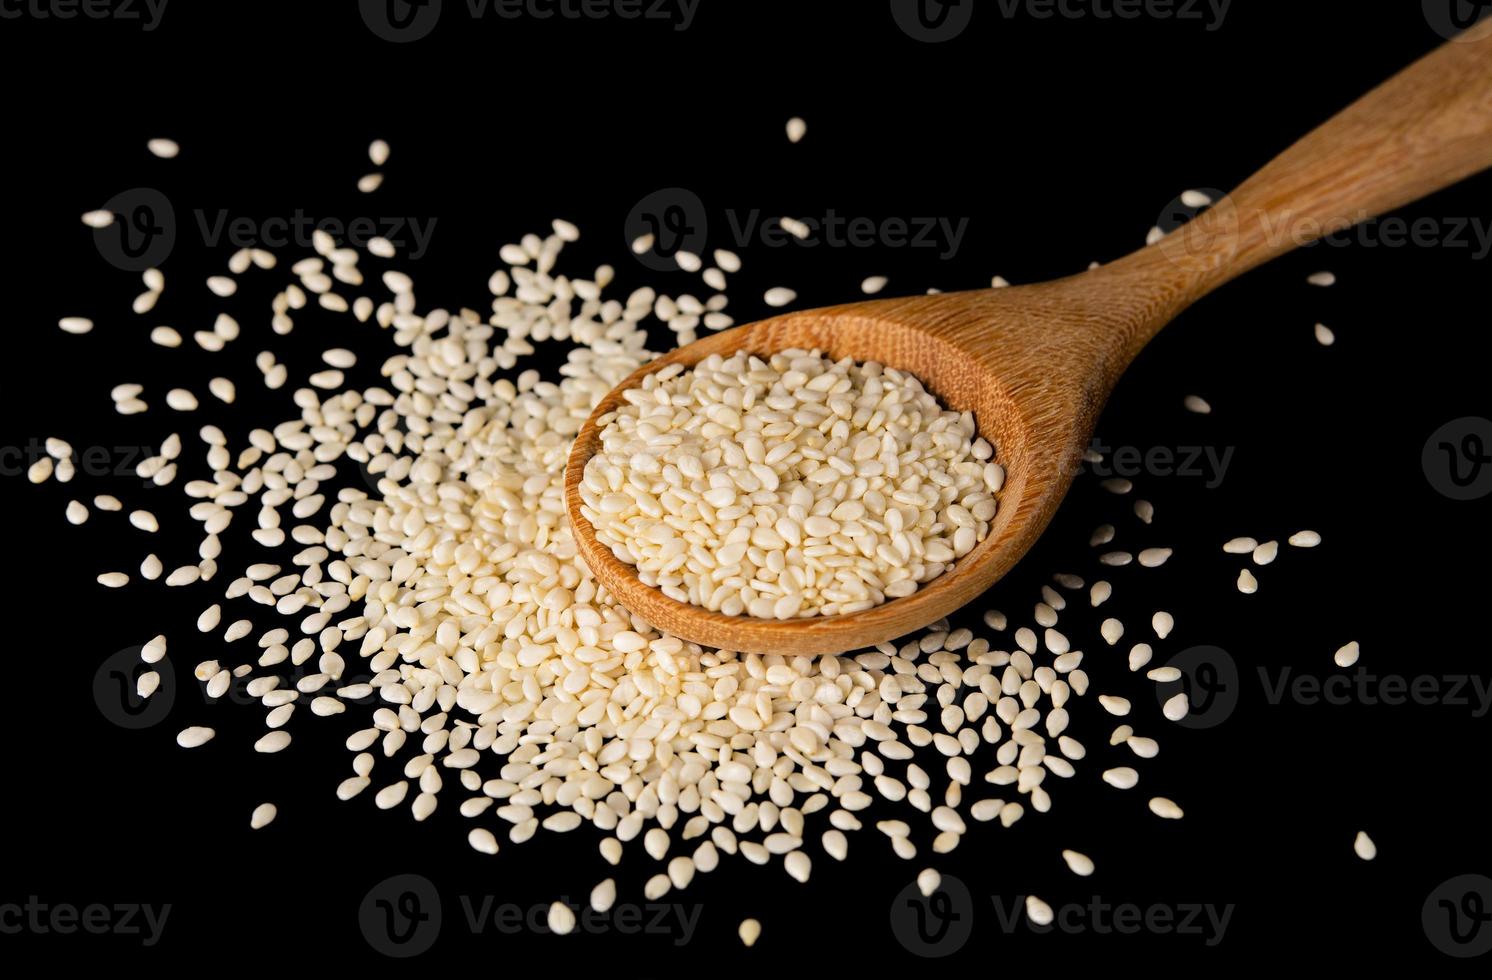 white sesame seeds with spoon on black background. organic natural sesame seeds with spoon on black background. toasted sesame seeds with spoon on black background photo